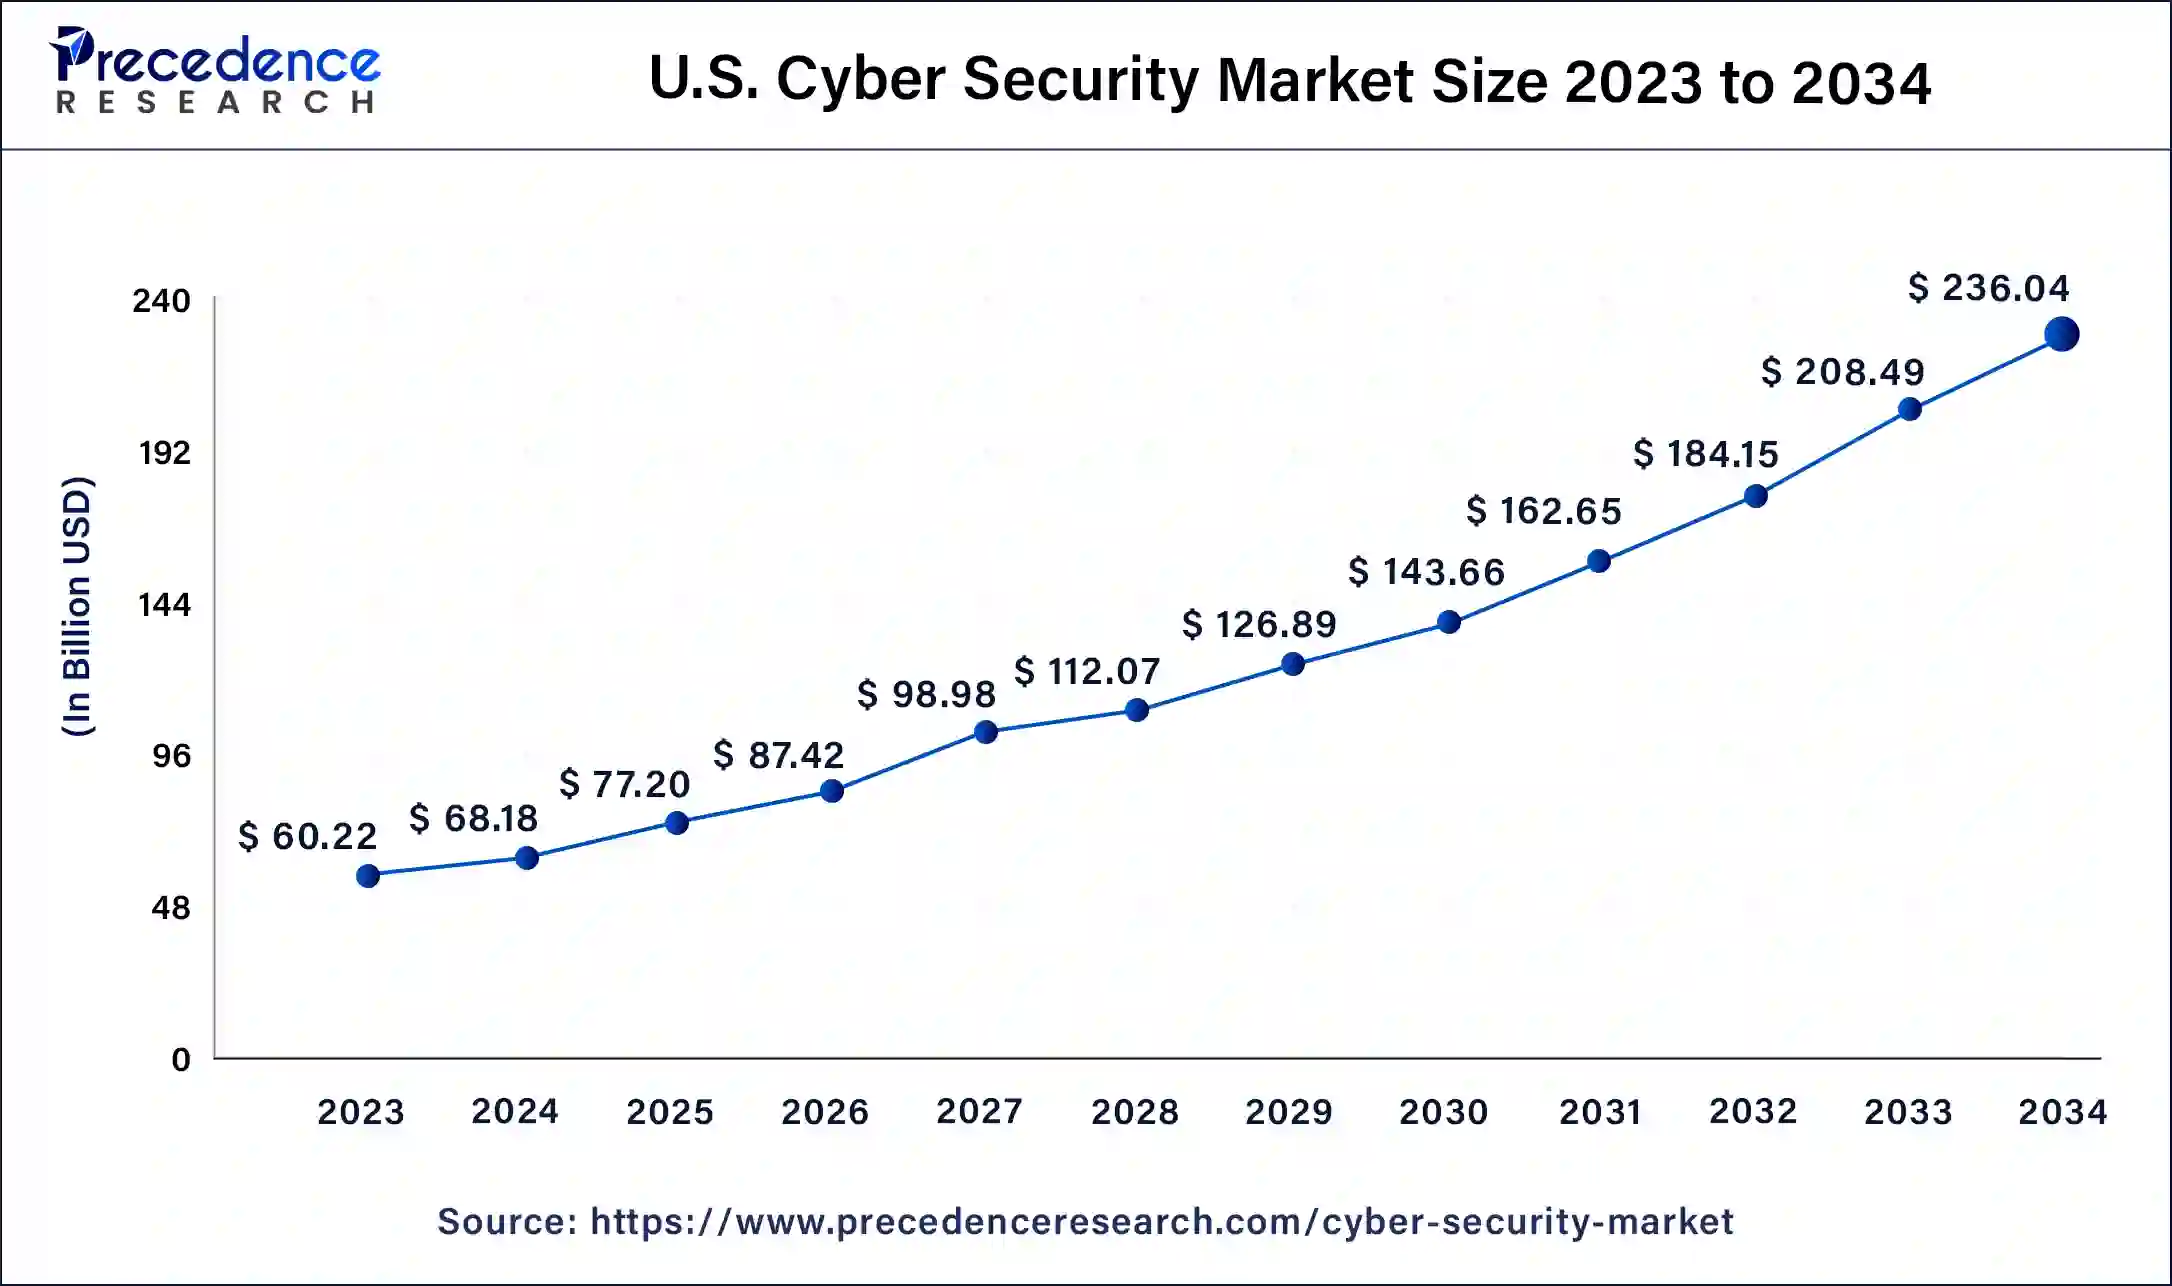 U.S. Cyber Security Market Size 2024 to 2034